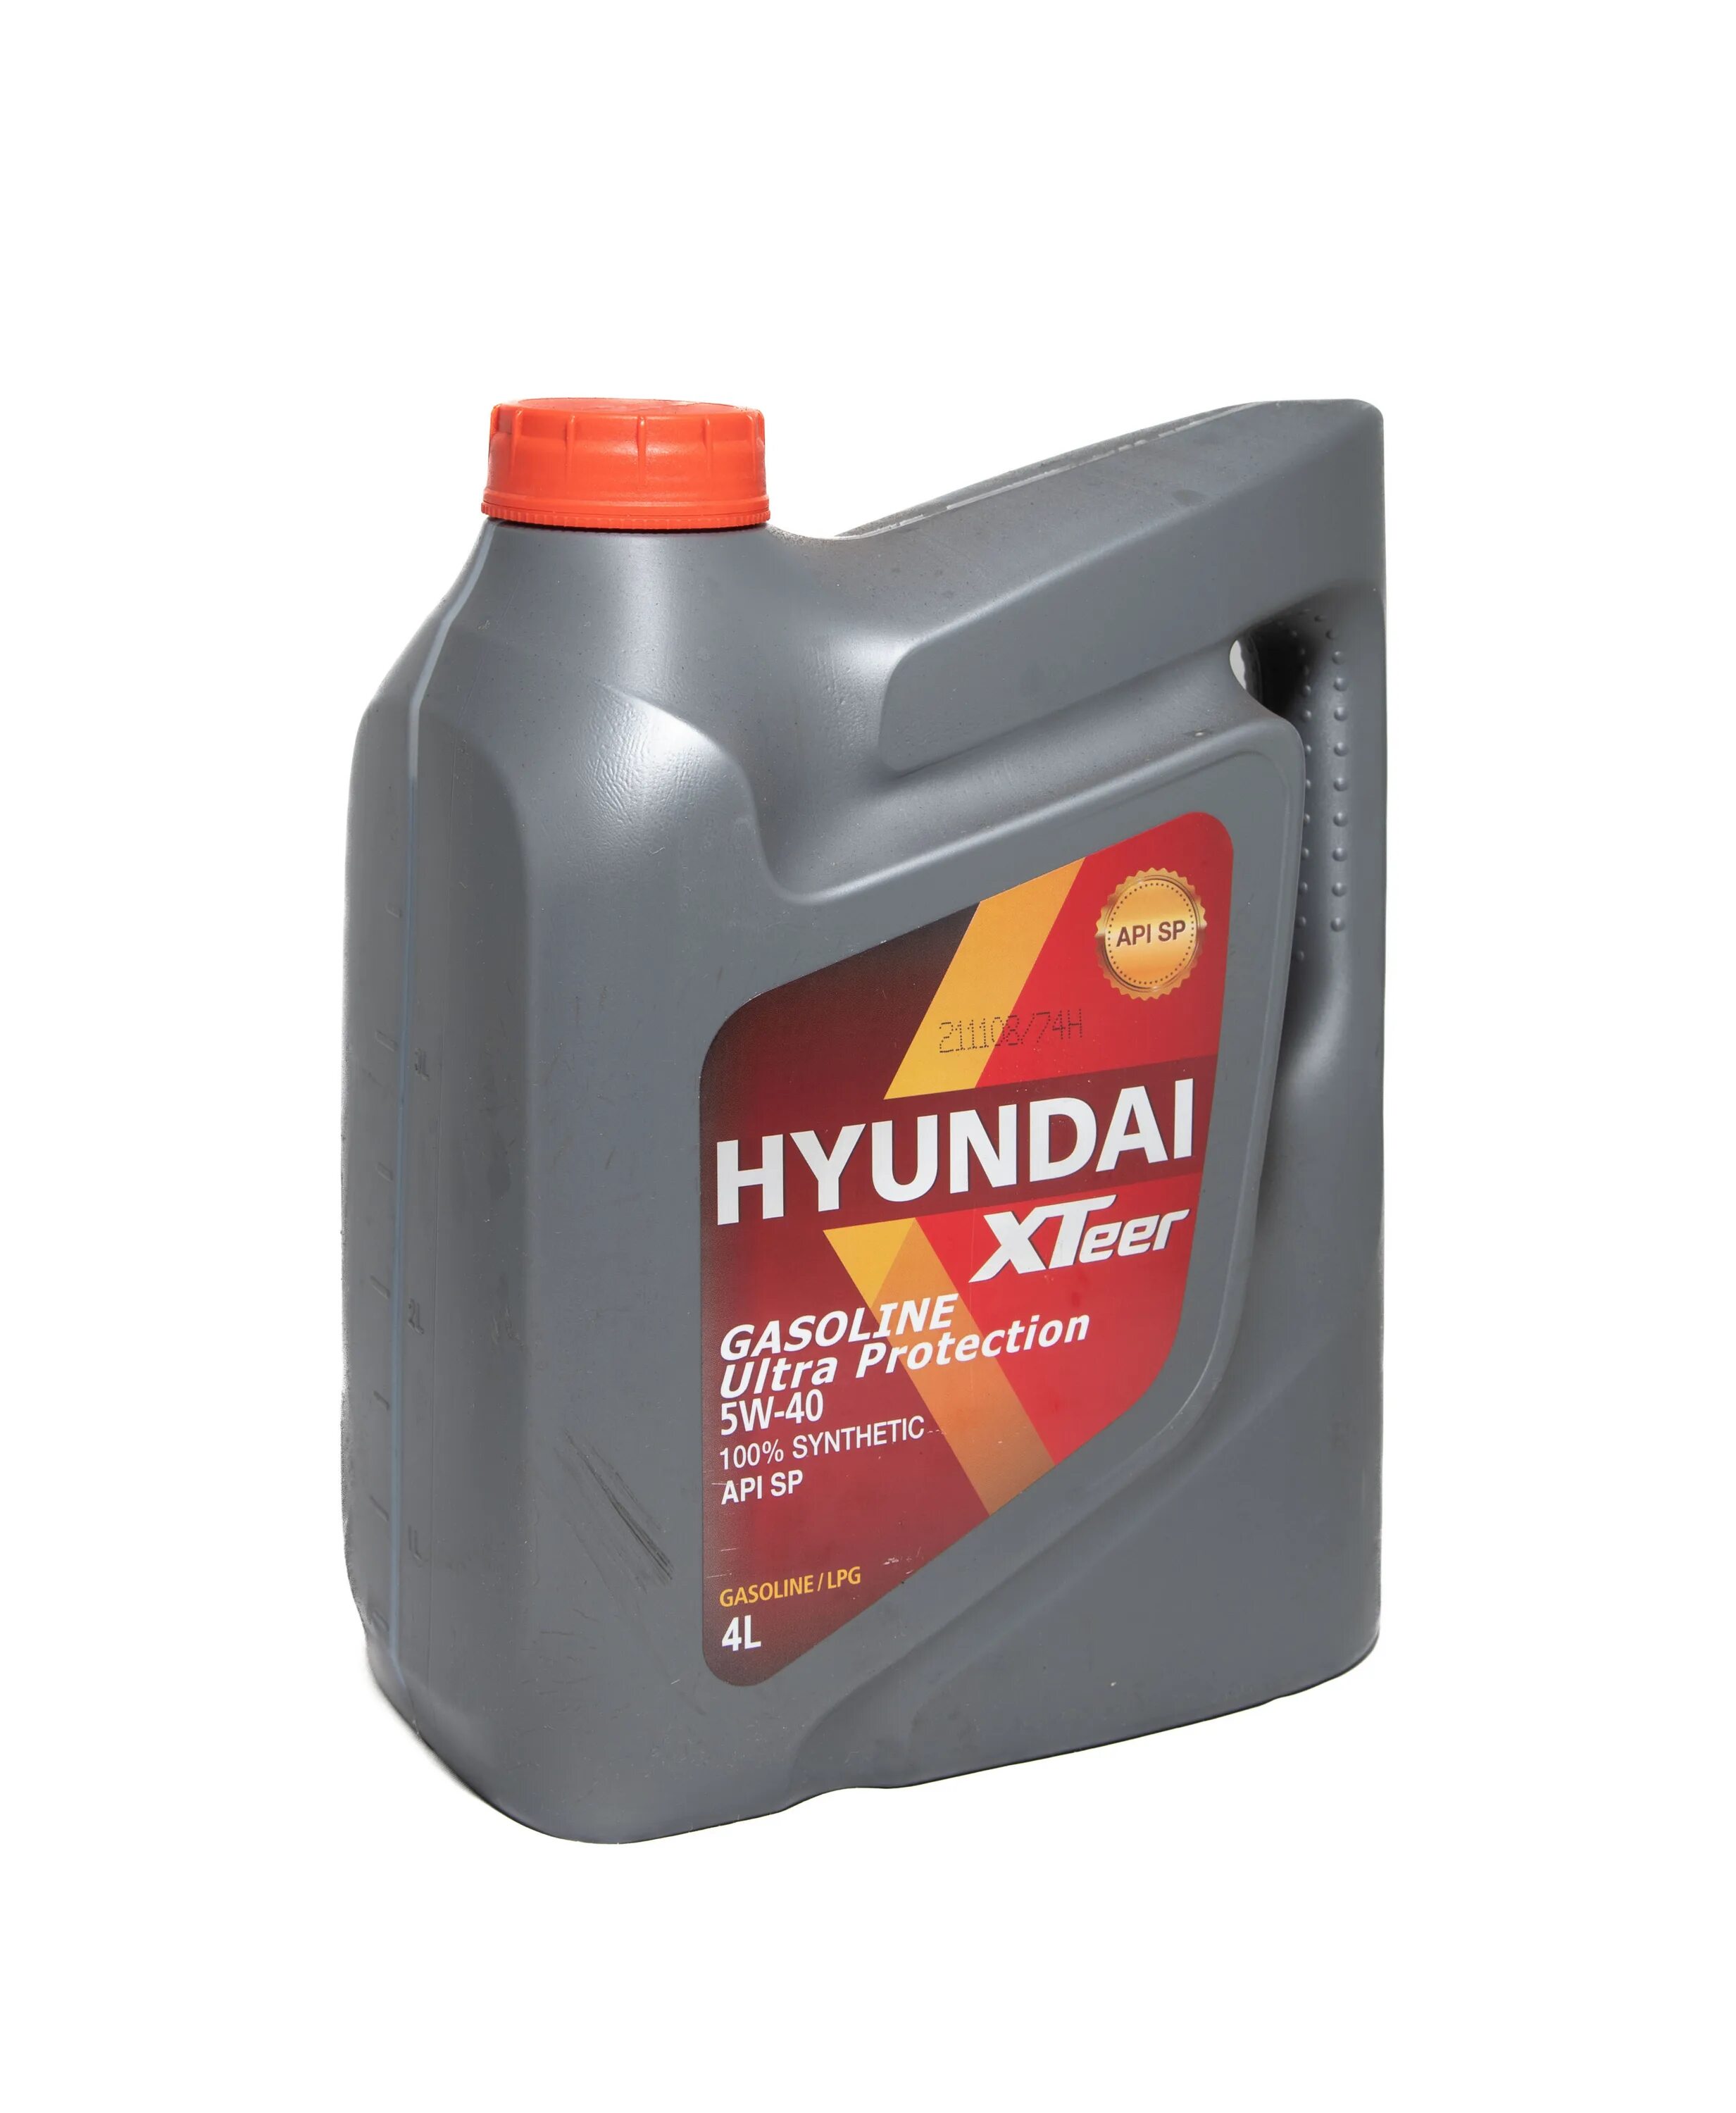 Hyundai XTEER 5w40 4л. Hyundai XTEER 5w30. 1011413 Hyundai XTEER. Hyundai XTEER gasoline Ultra Protection 5w40 SP.